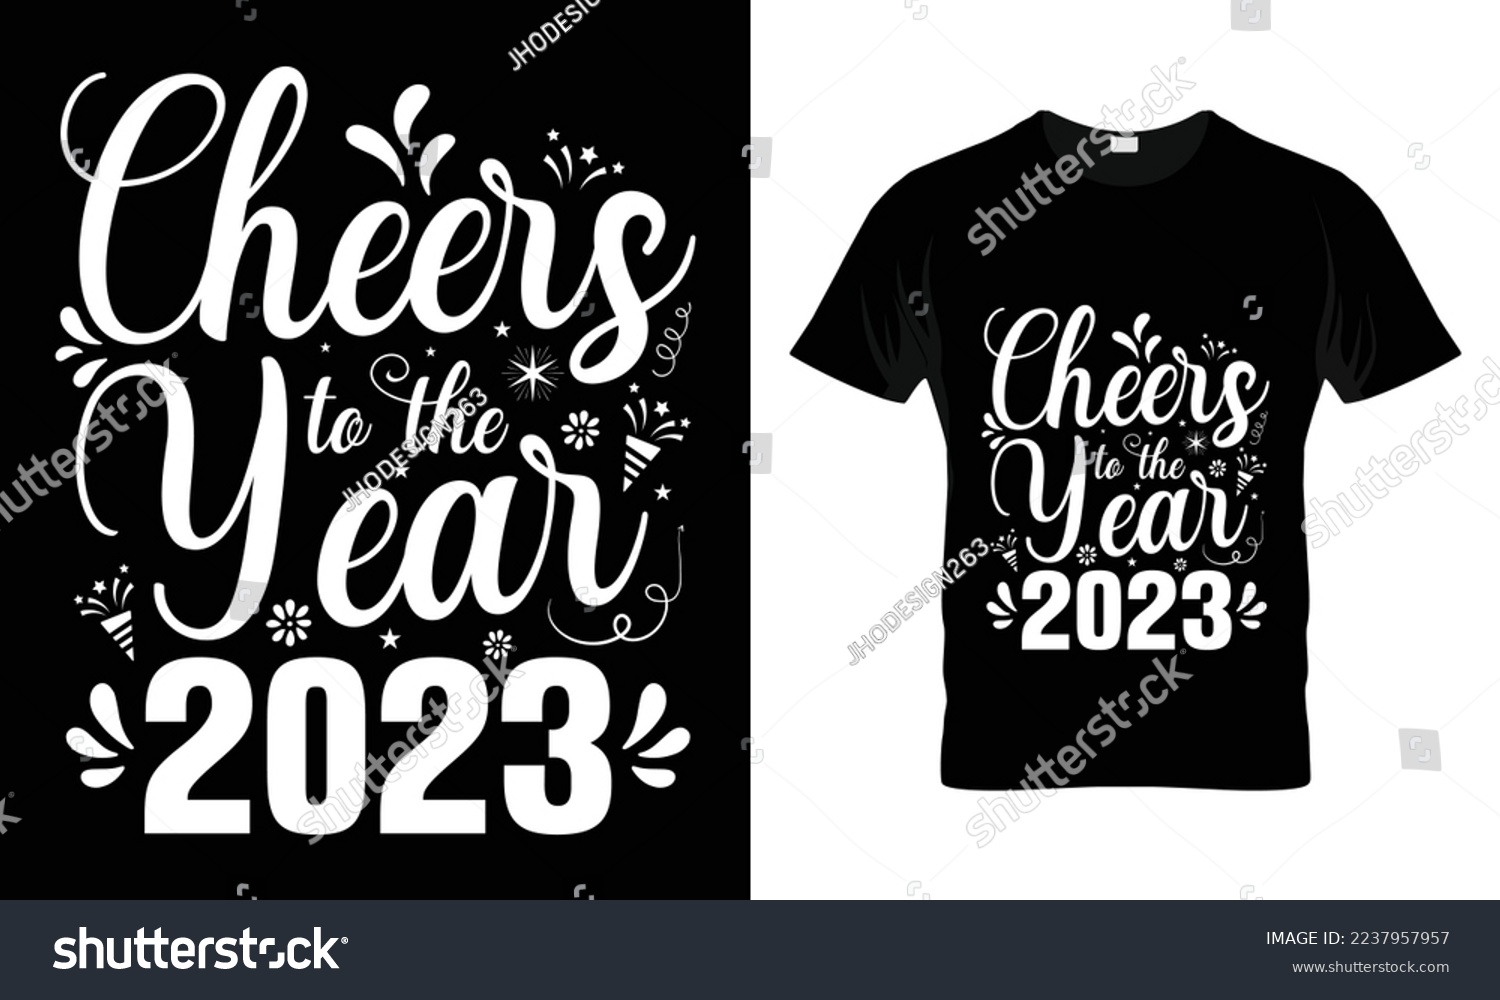 SVG of Cheers to the year 2023 design template vector and typography.
Ready for t-shirt, mug,gift and other printing,2023 svg design,New Year Stickers quotes t shirt designs
Happy new year svg. svg